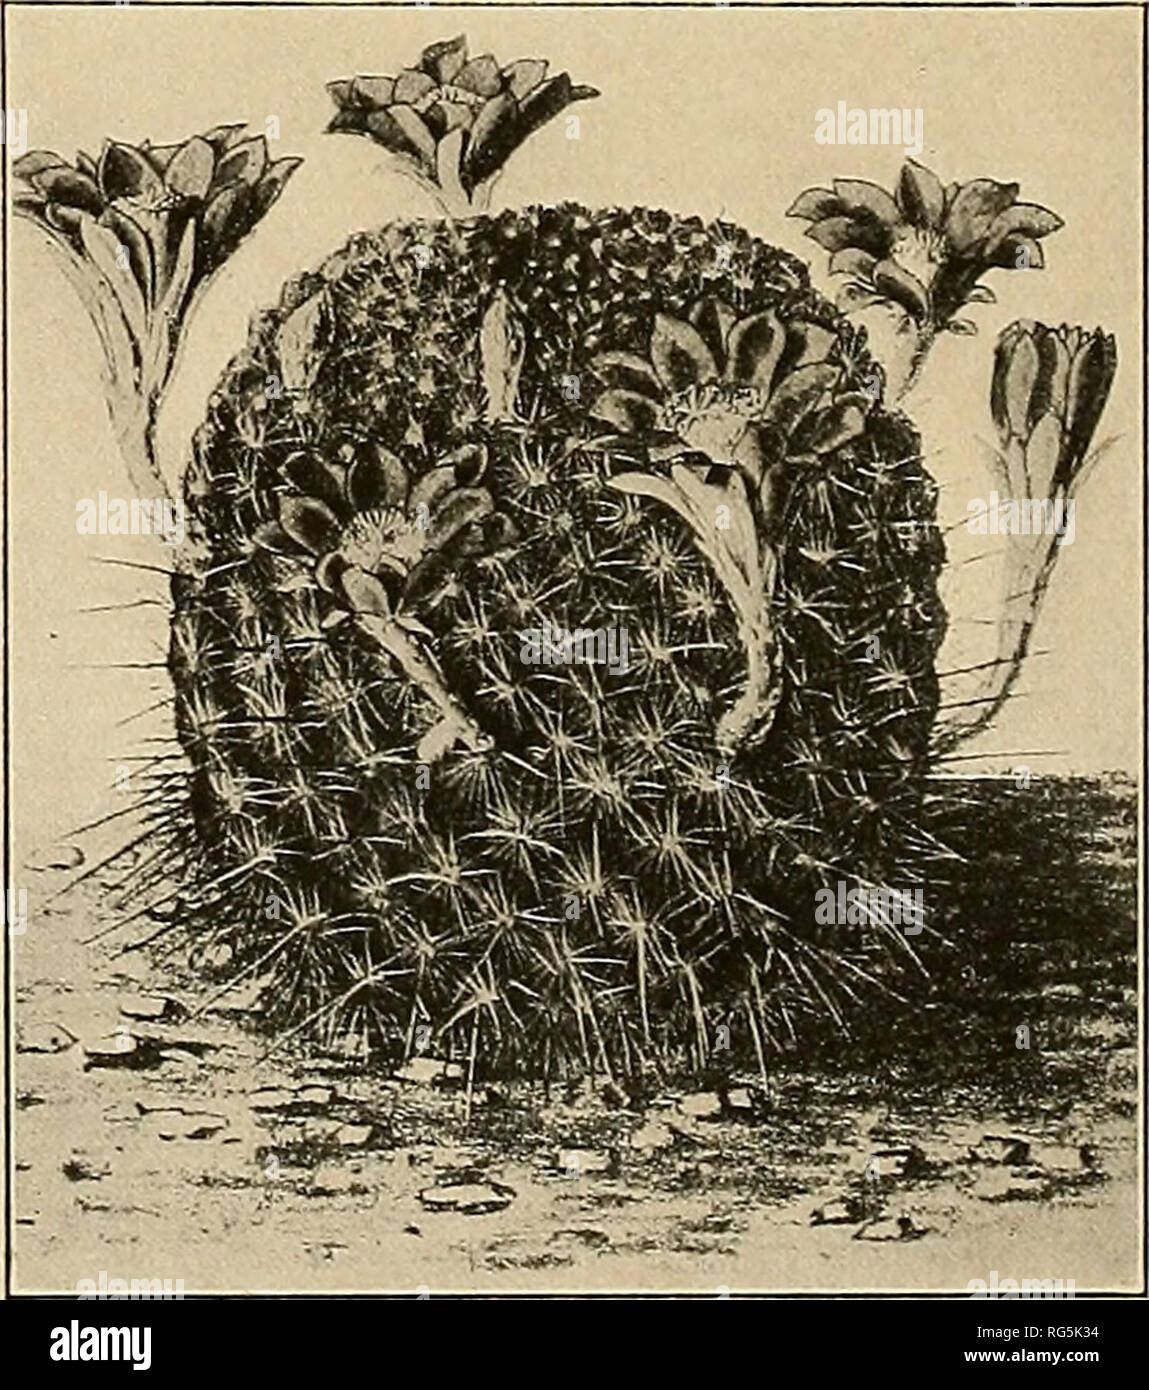 . The Cactaceae : descriptions and illustrations of plants of the cactus family. Fig. 57.—Rebutia minuscula. Fig. 58.—Rebutia pseudominuscula. This plant is so small that when grown alone it is quite inconspicuous, but de Laet has grown it very successfully as a graft on one of the cylindric cacti. When grown this way it gives off many new plants, forming a cespitose mass and flowering freely. De Laet also lists in his Catalogue the variety cristatus under Echinocactus minusculus. Illustrations: Bliihende Kakteen 1: pi. 31; Schumann, Gesamtb. Kakteen f. 67; Curtis's Bot. Mag. 140: pi. 8583; Mo Stock Photo